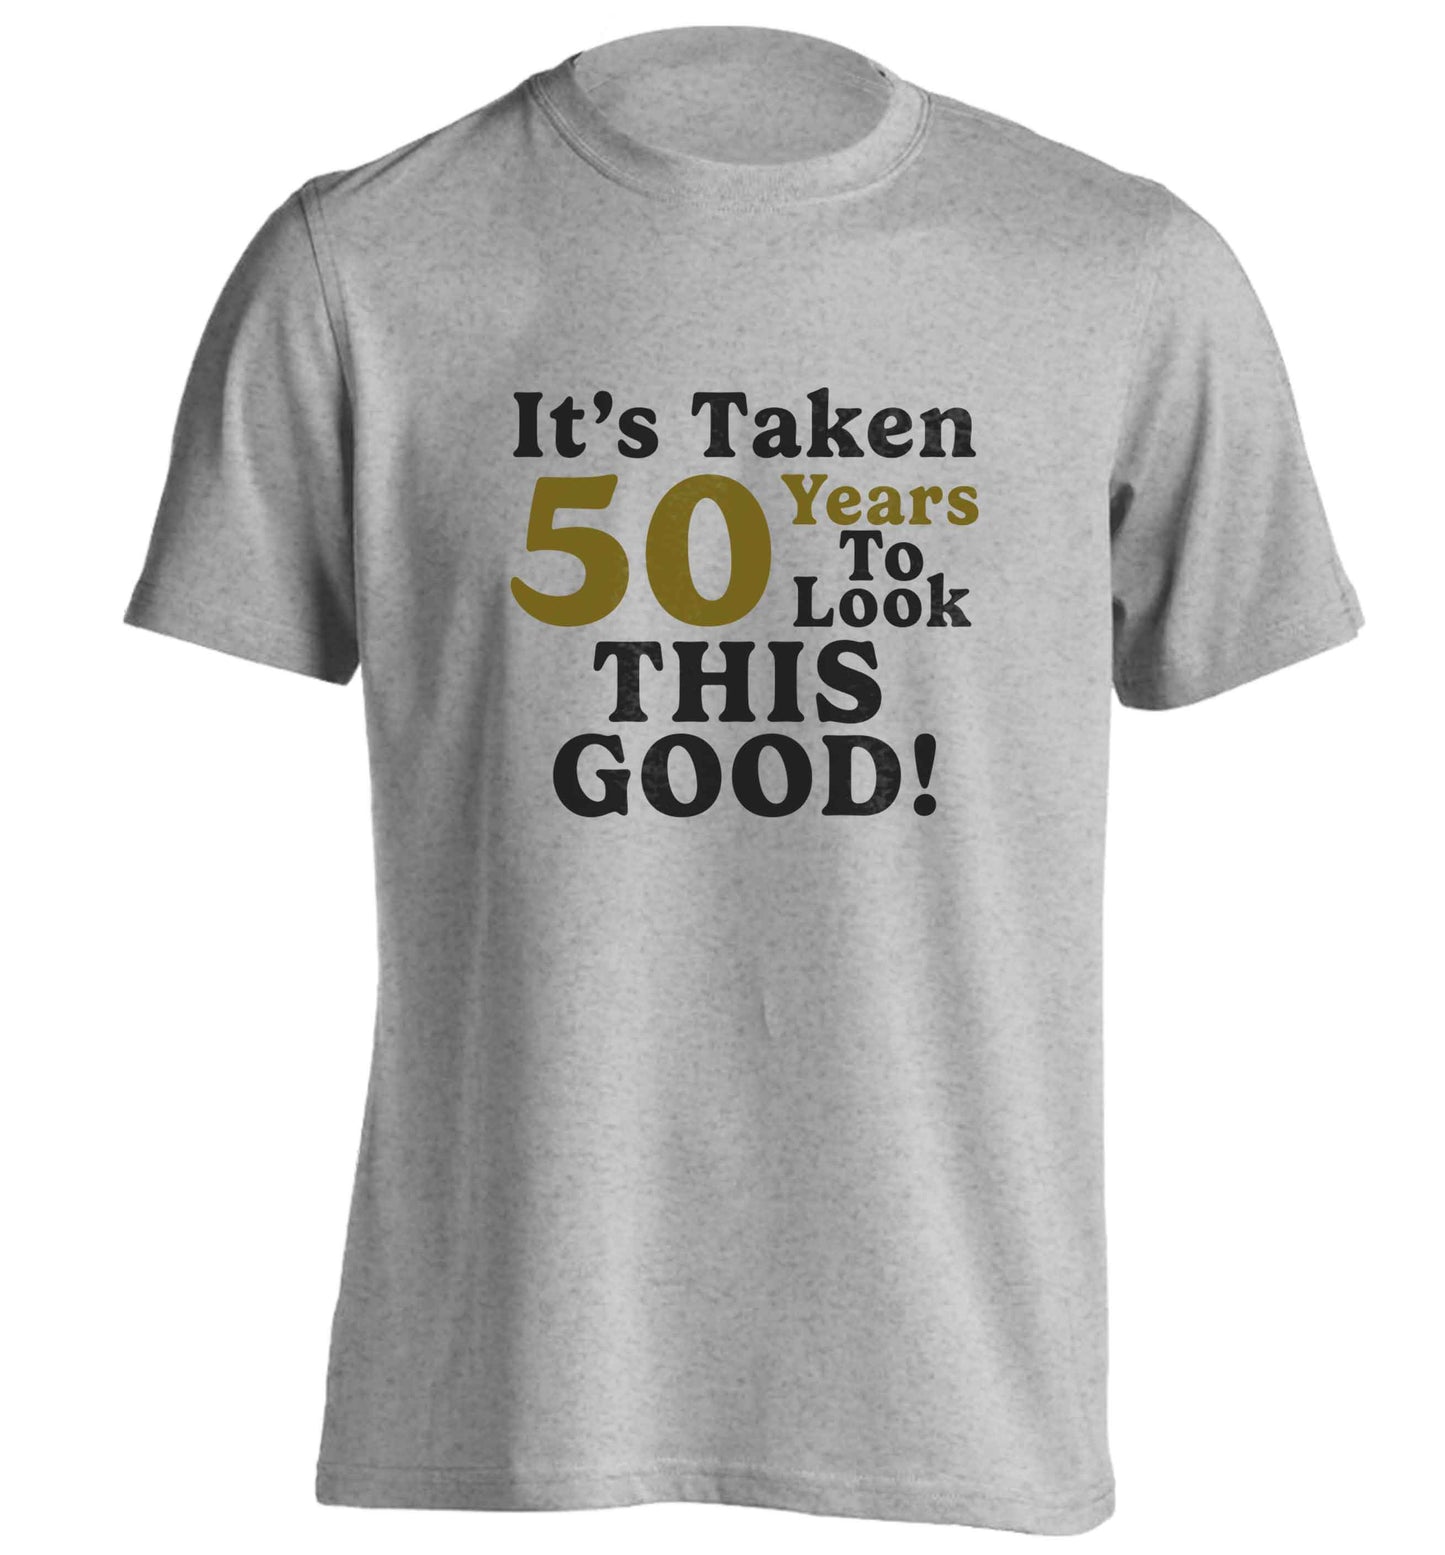 It's taken 50 years to look this good! adults unisex grey Tshirt 2XL